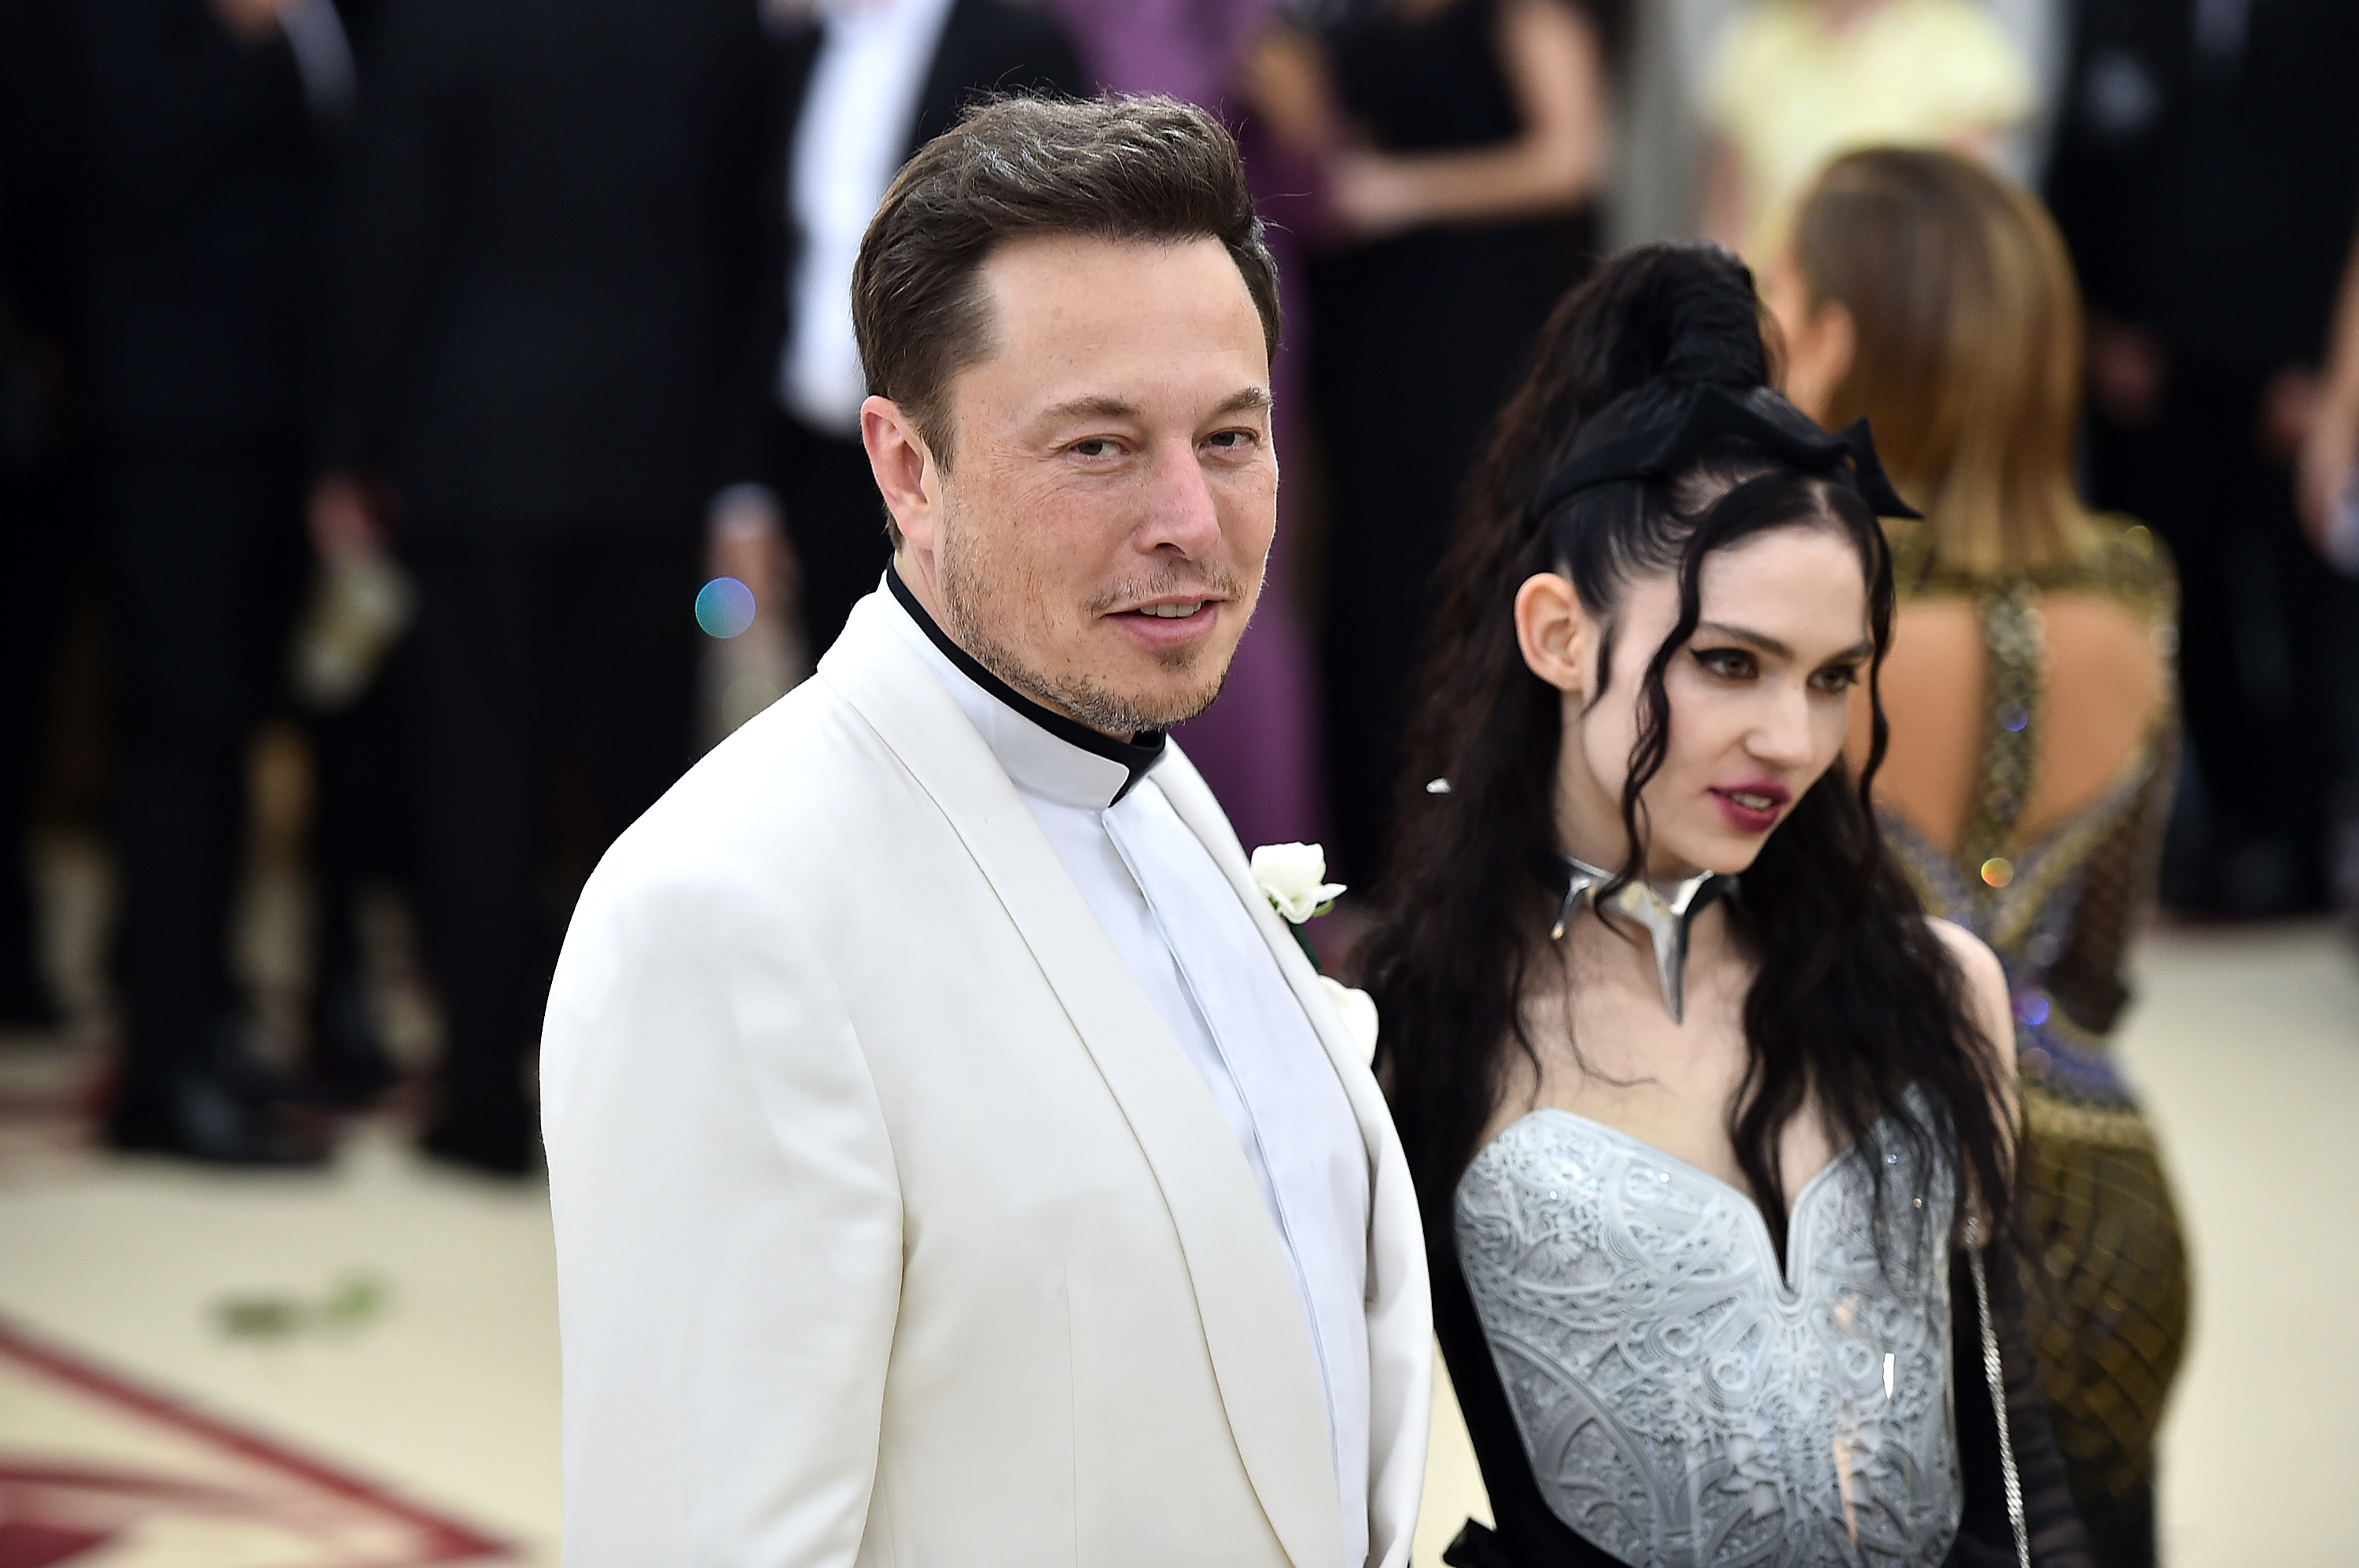 Elon Musk in a tuxedo and a Grimes in a silver outfit with structured shoulders and a choker at an event